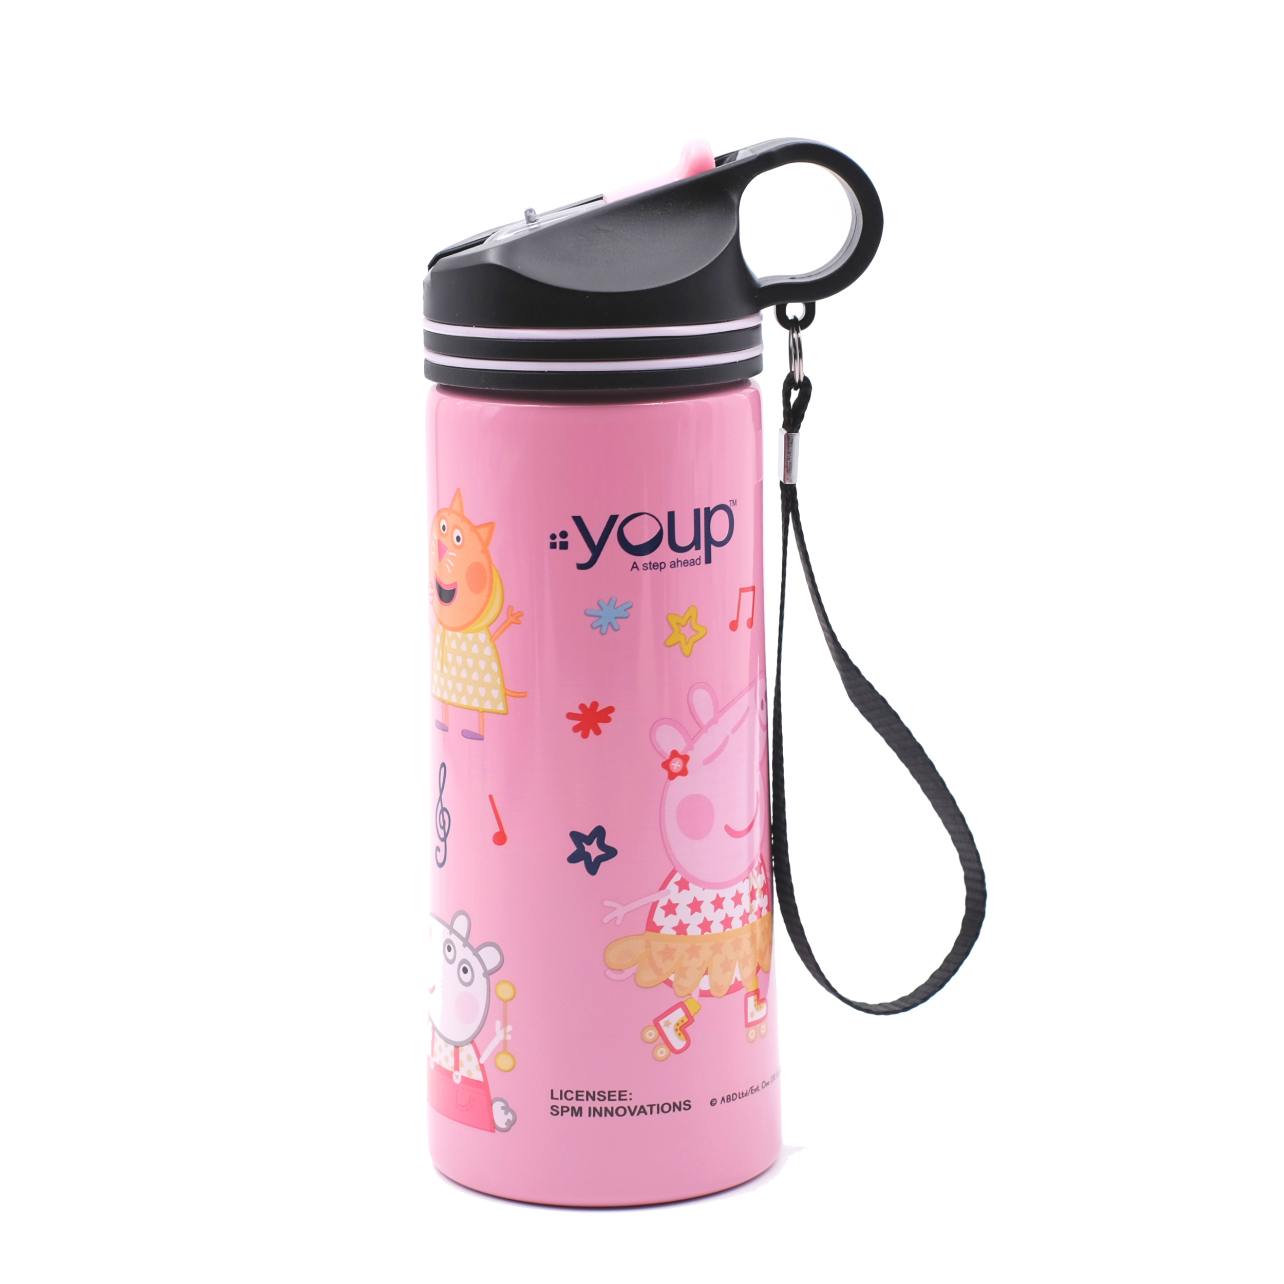 Youp Stainless Steel Pink Color Peppa Pig Kids Water Bottle HYOWER - 750 ml